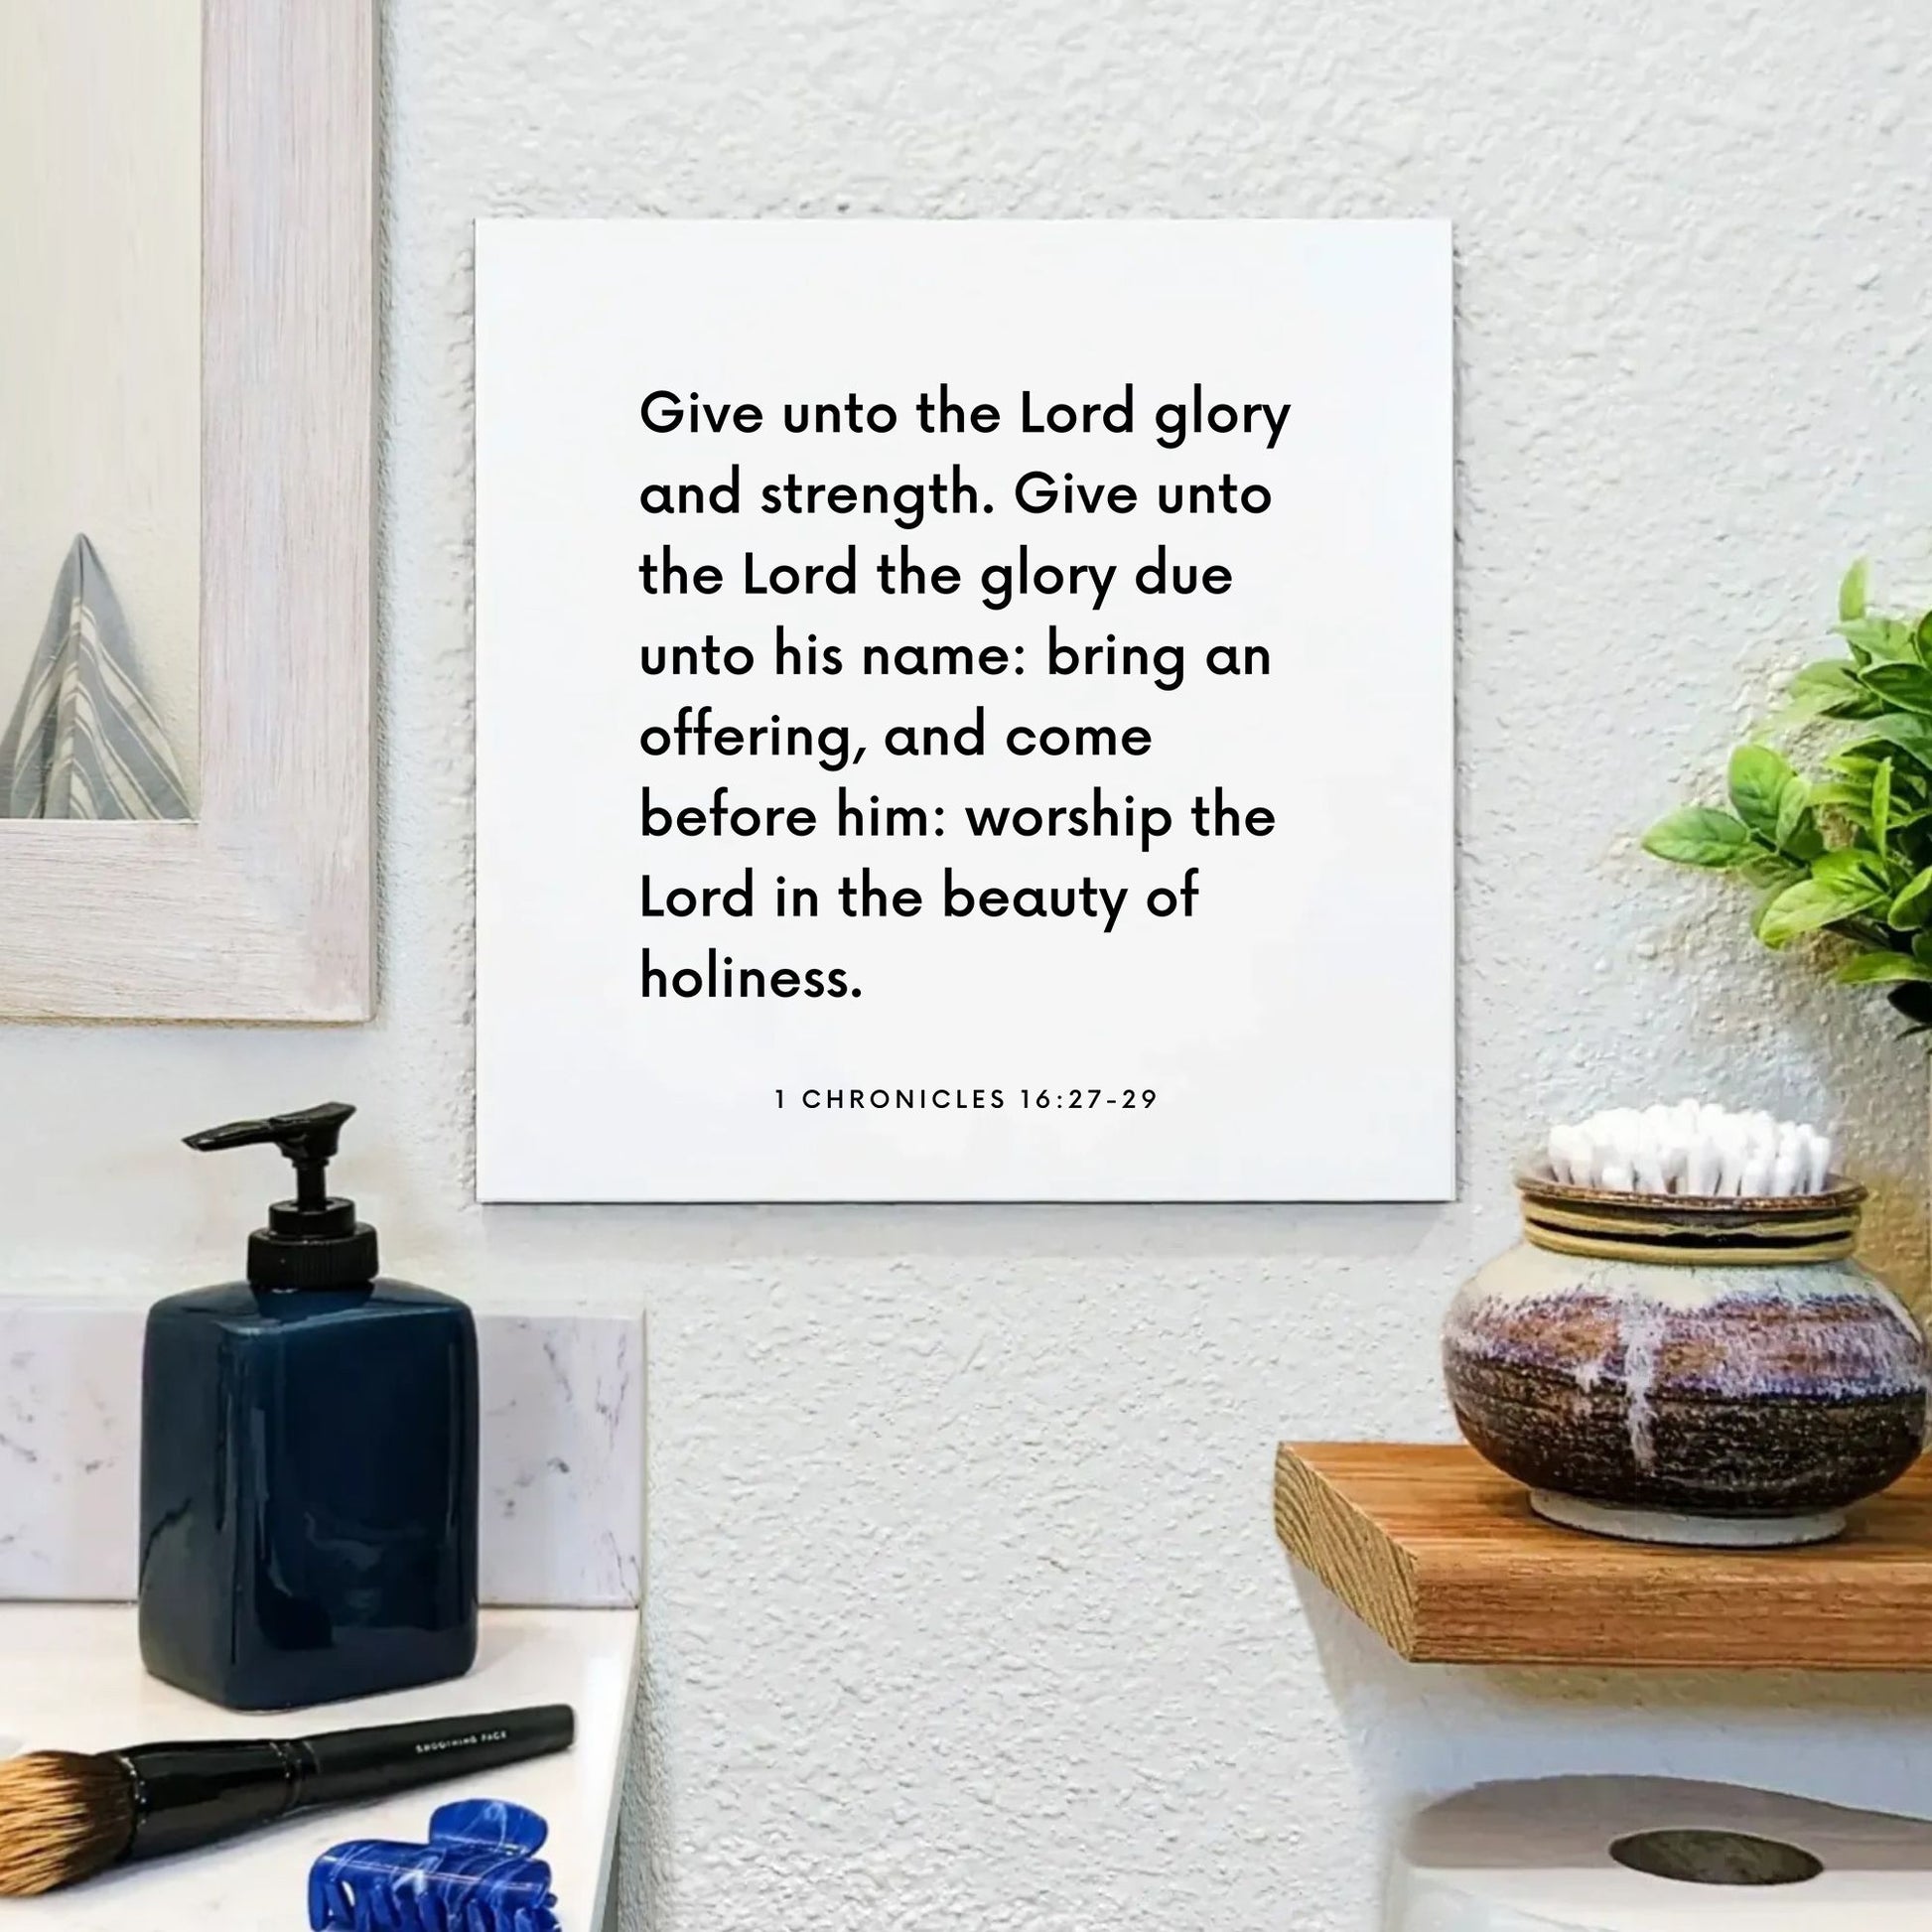 Bathroom mouting of the scripture tile for 1 Chronicles 16:27-29 - "Give unto the Lord glory and strength"